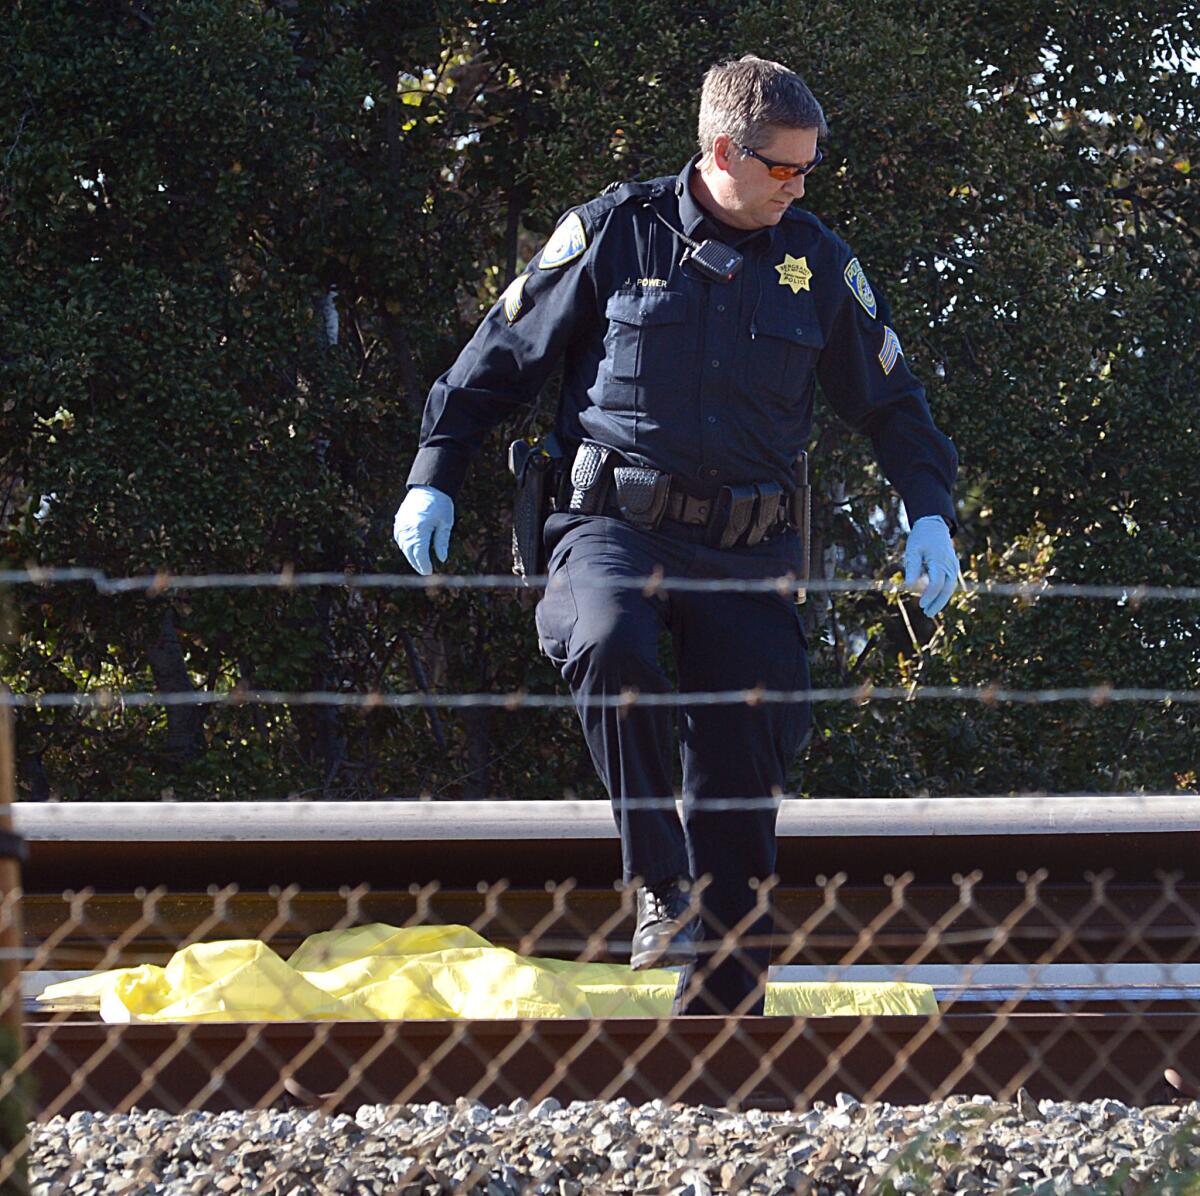 A BART police officer looks along the BART tracks along Jones Road in Walnut Creek, where a moving train struck and killed two workers on Oct. 19, 2013.